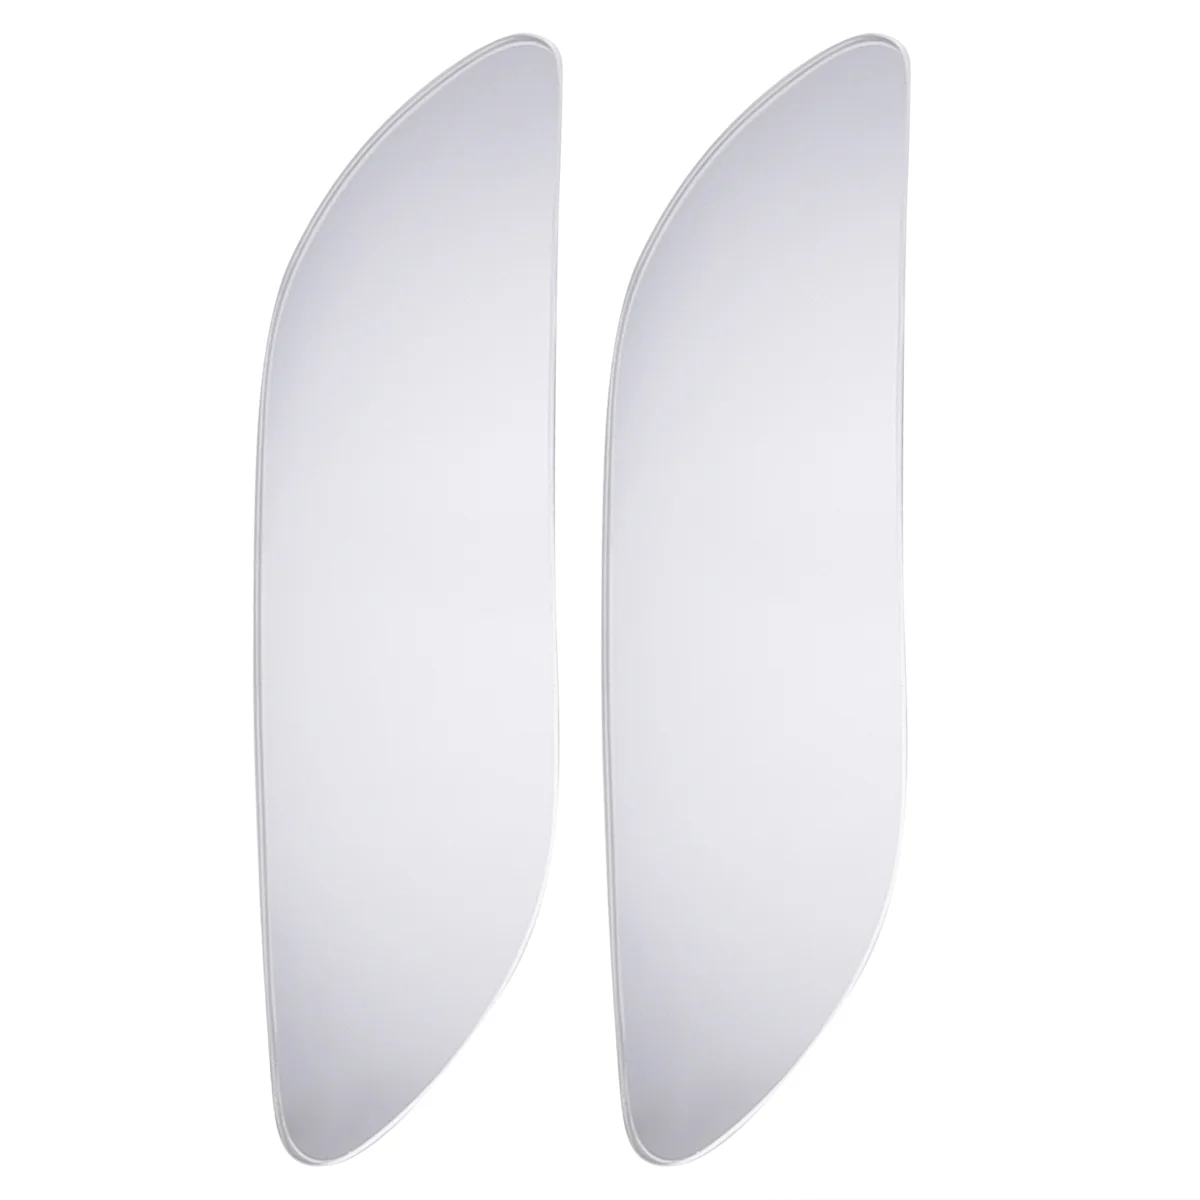 

1 Pair Extra Long Wide Angle Rear View Mirror Blind Spot Mirror for Trucks (White)